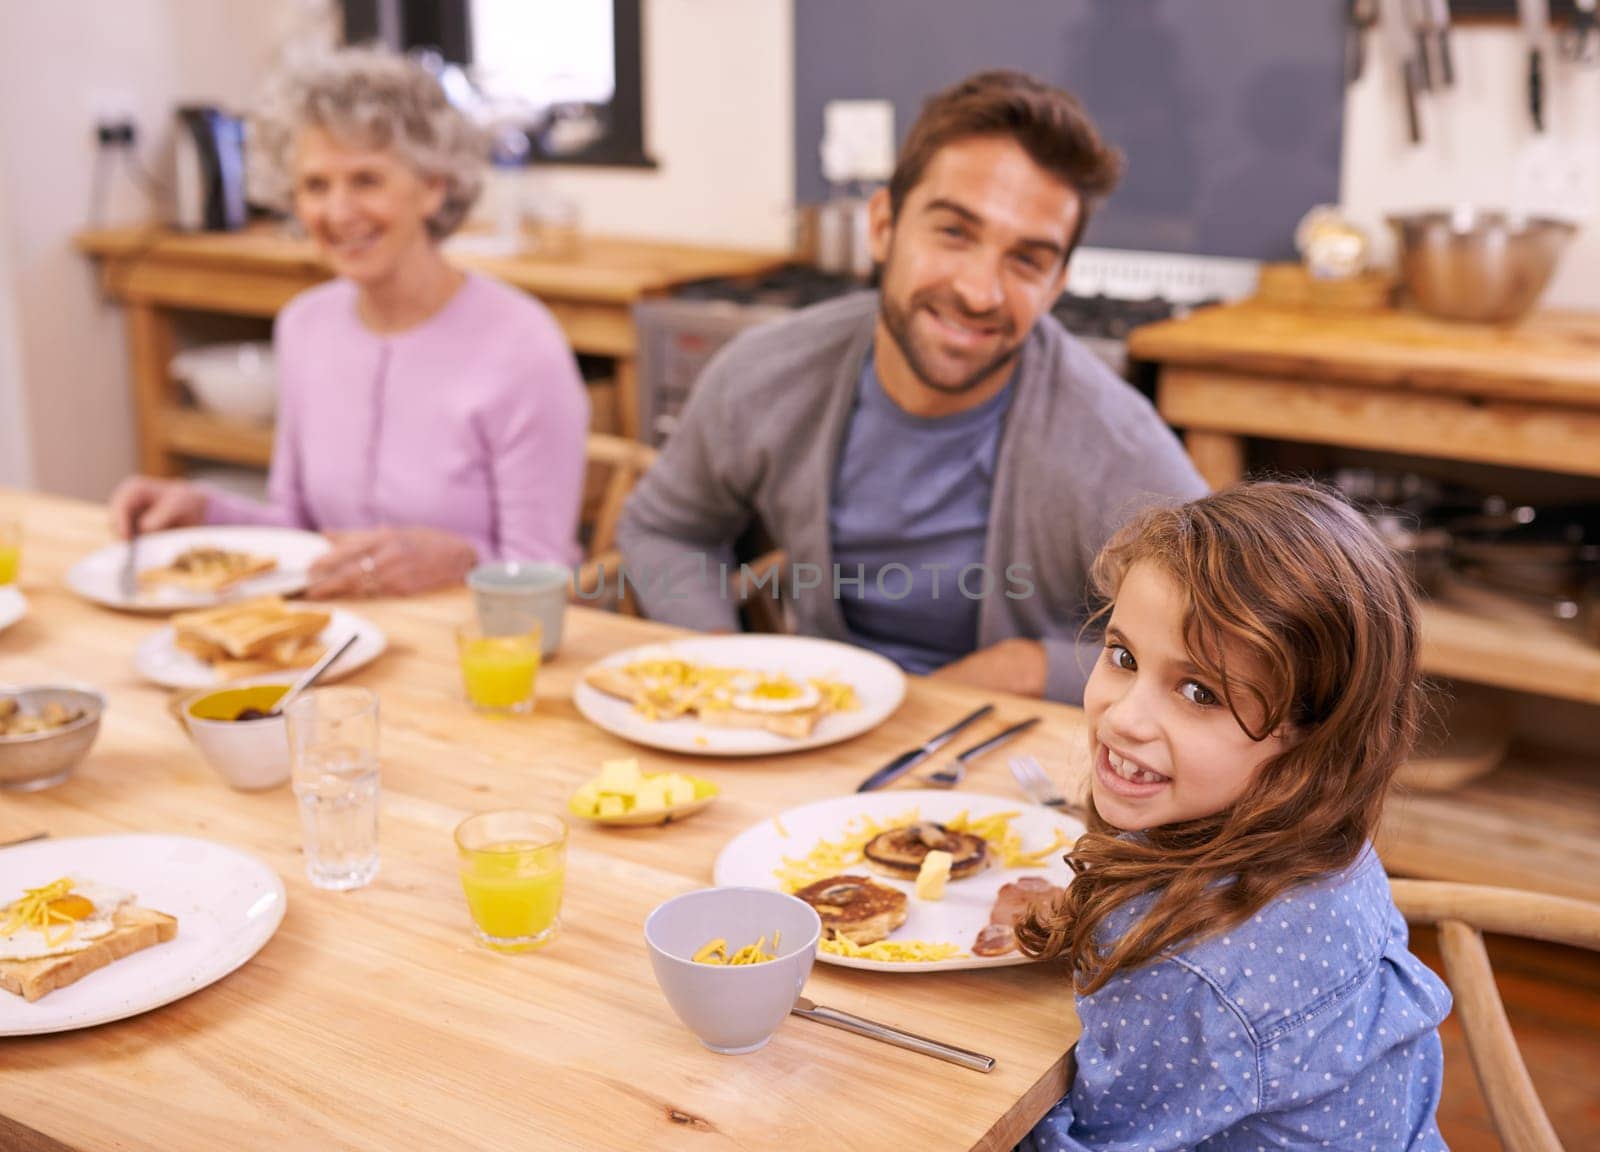 Love, breakfast and family in portrait or kitchen with food, eating or bonding together at table. Meal, pancakes and father or grandmother with child for brunch, nutrition or communication at home by YuriArcurs